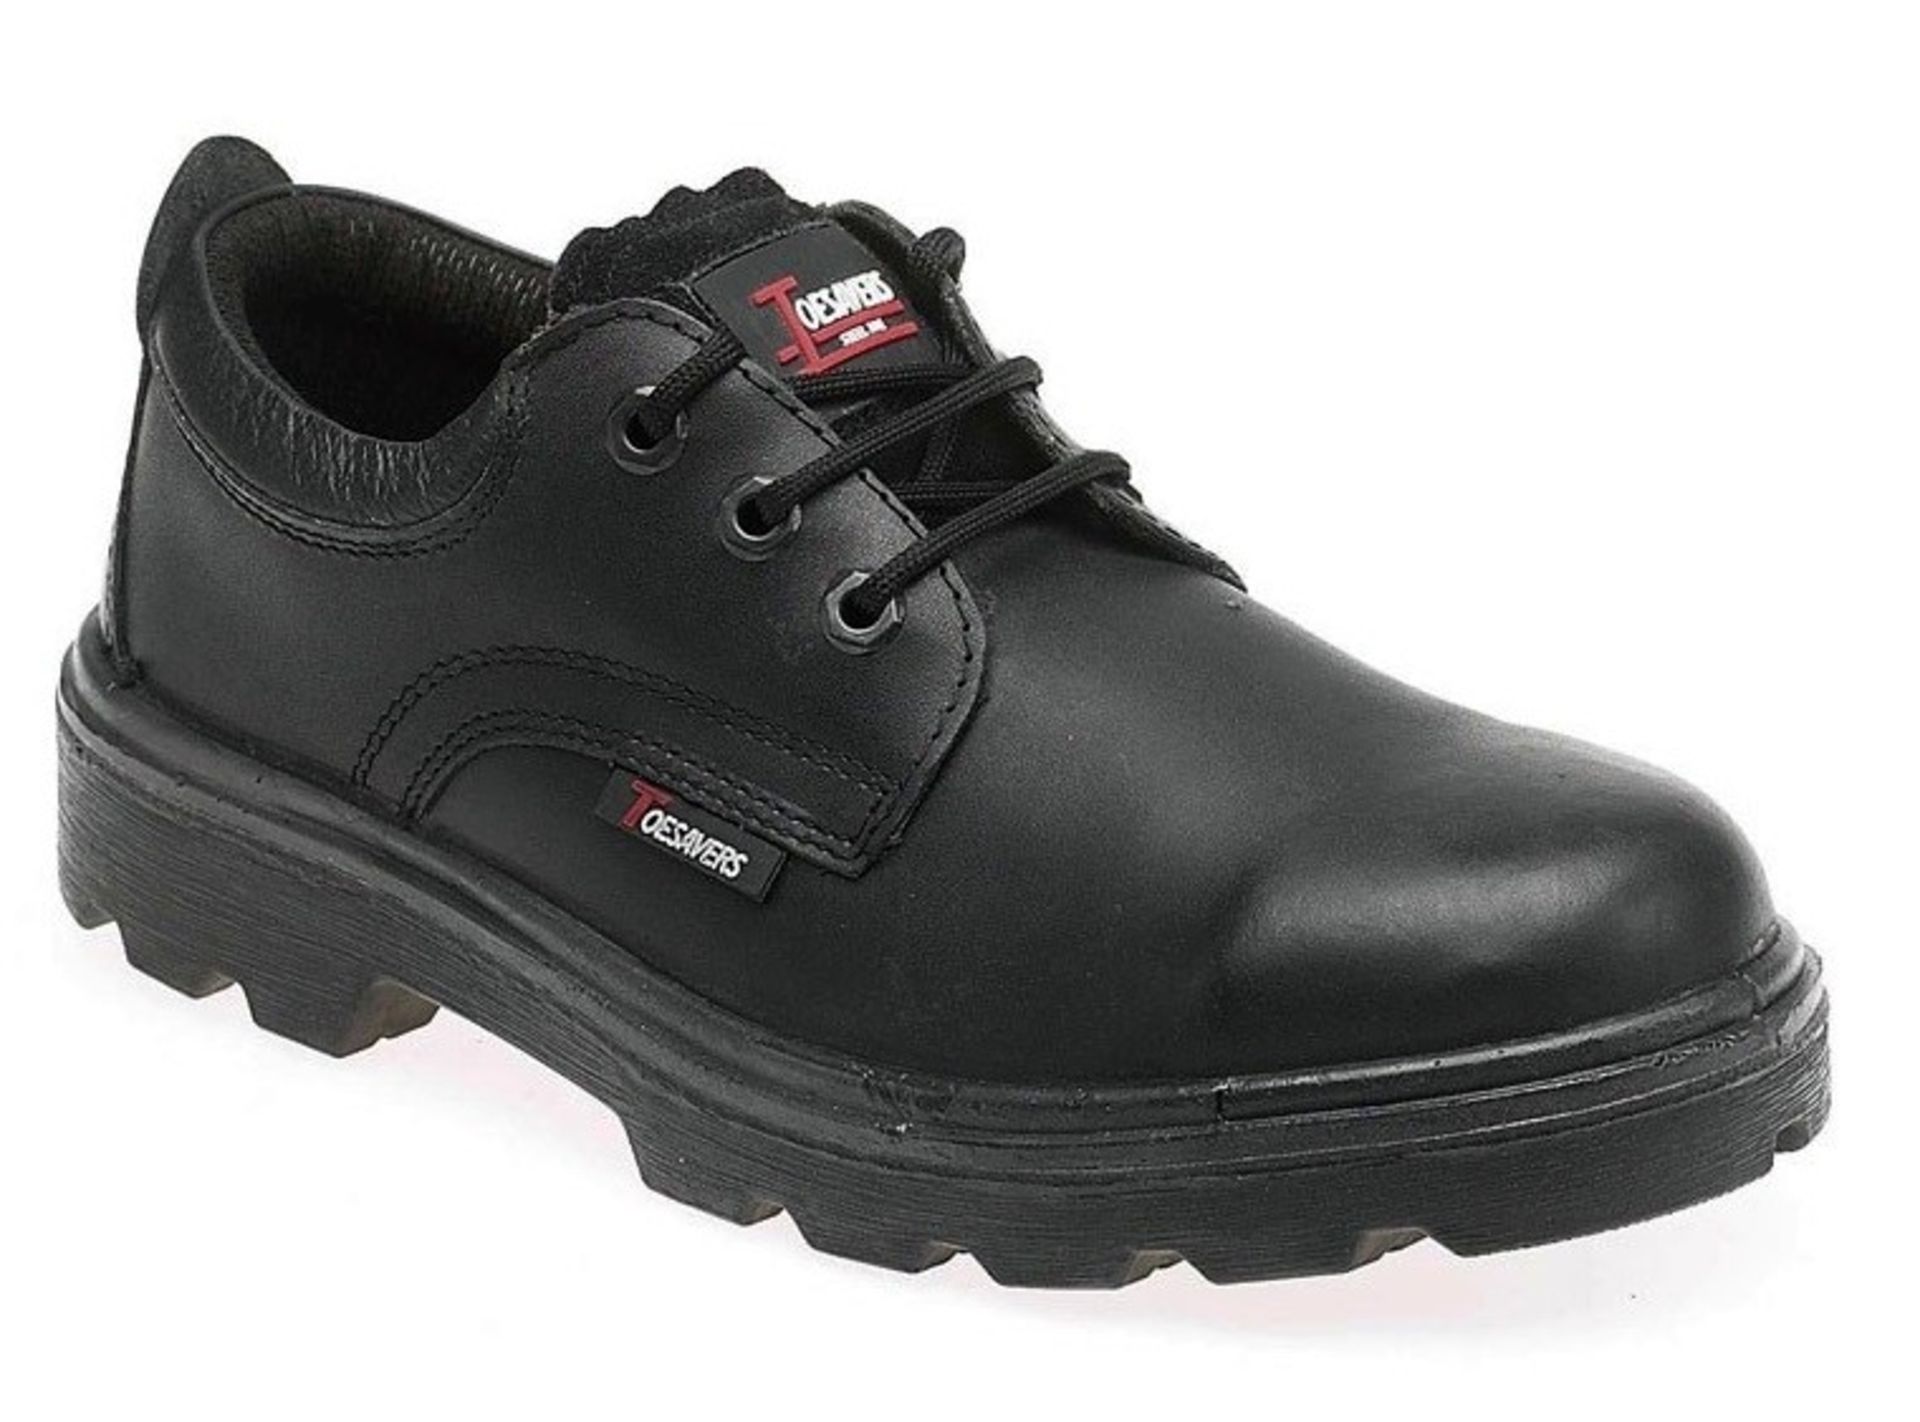 1 x Pair Of Toesavers STEEL TOE Black Leather Safety Shoe - Size 10 - CL185 - Ref: BR/1410/10/